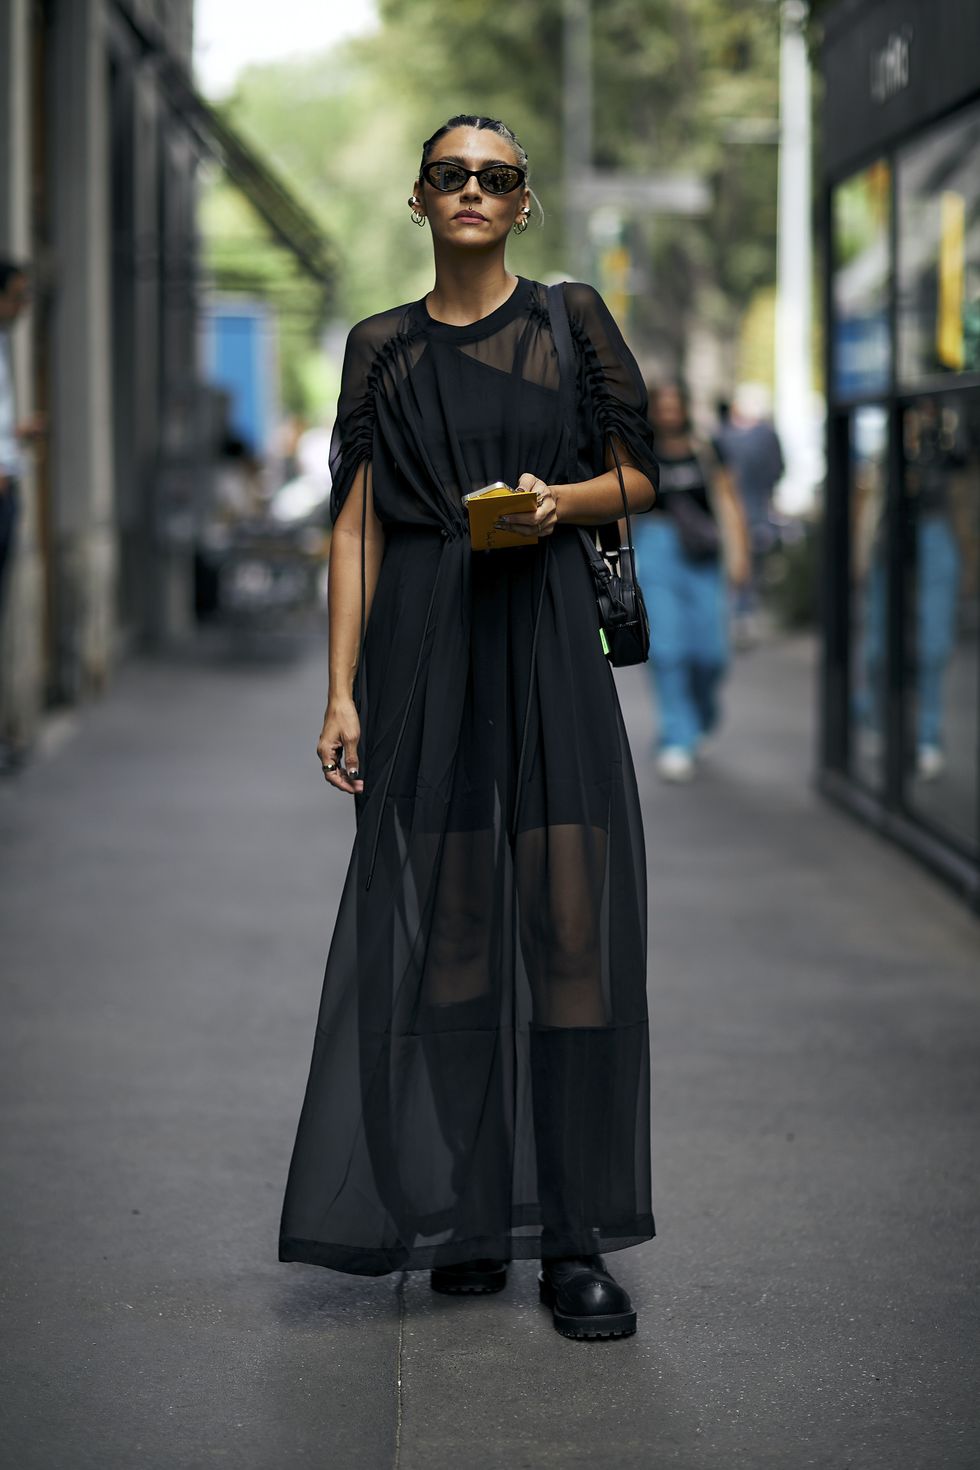 Model-Off-Duty: Street Style at Milan Fashion Week - The New York